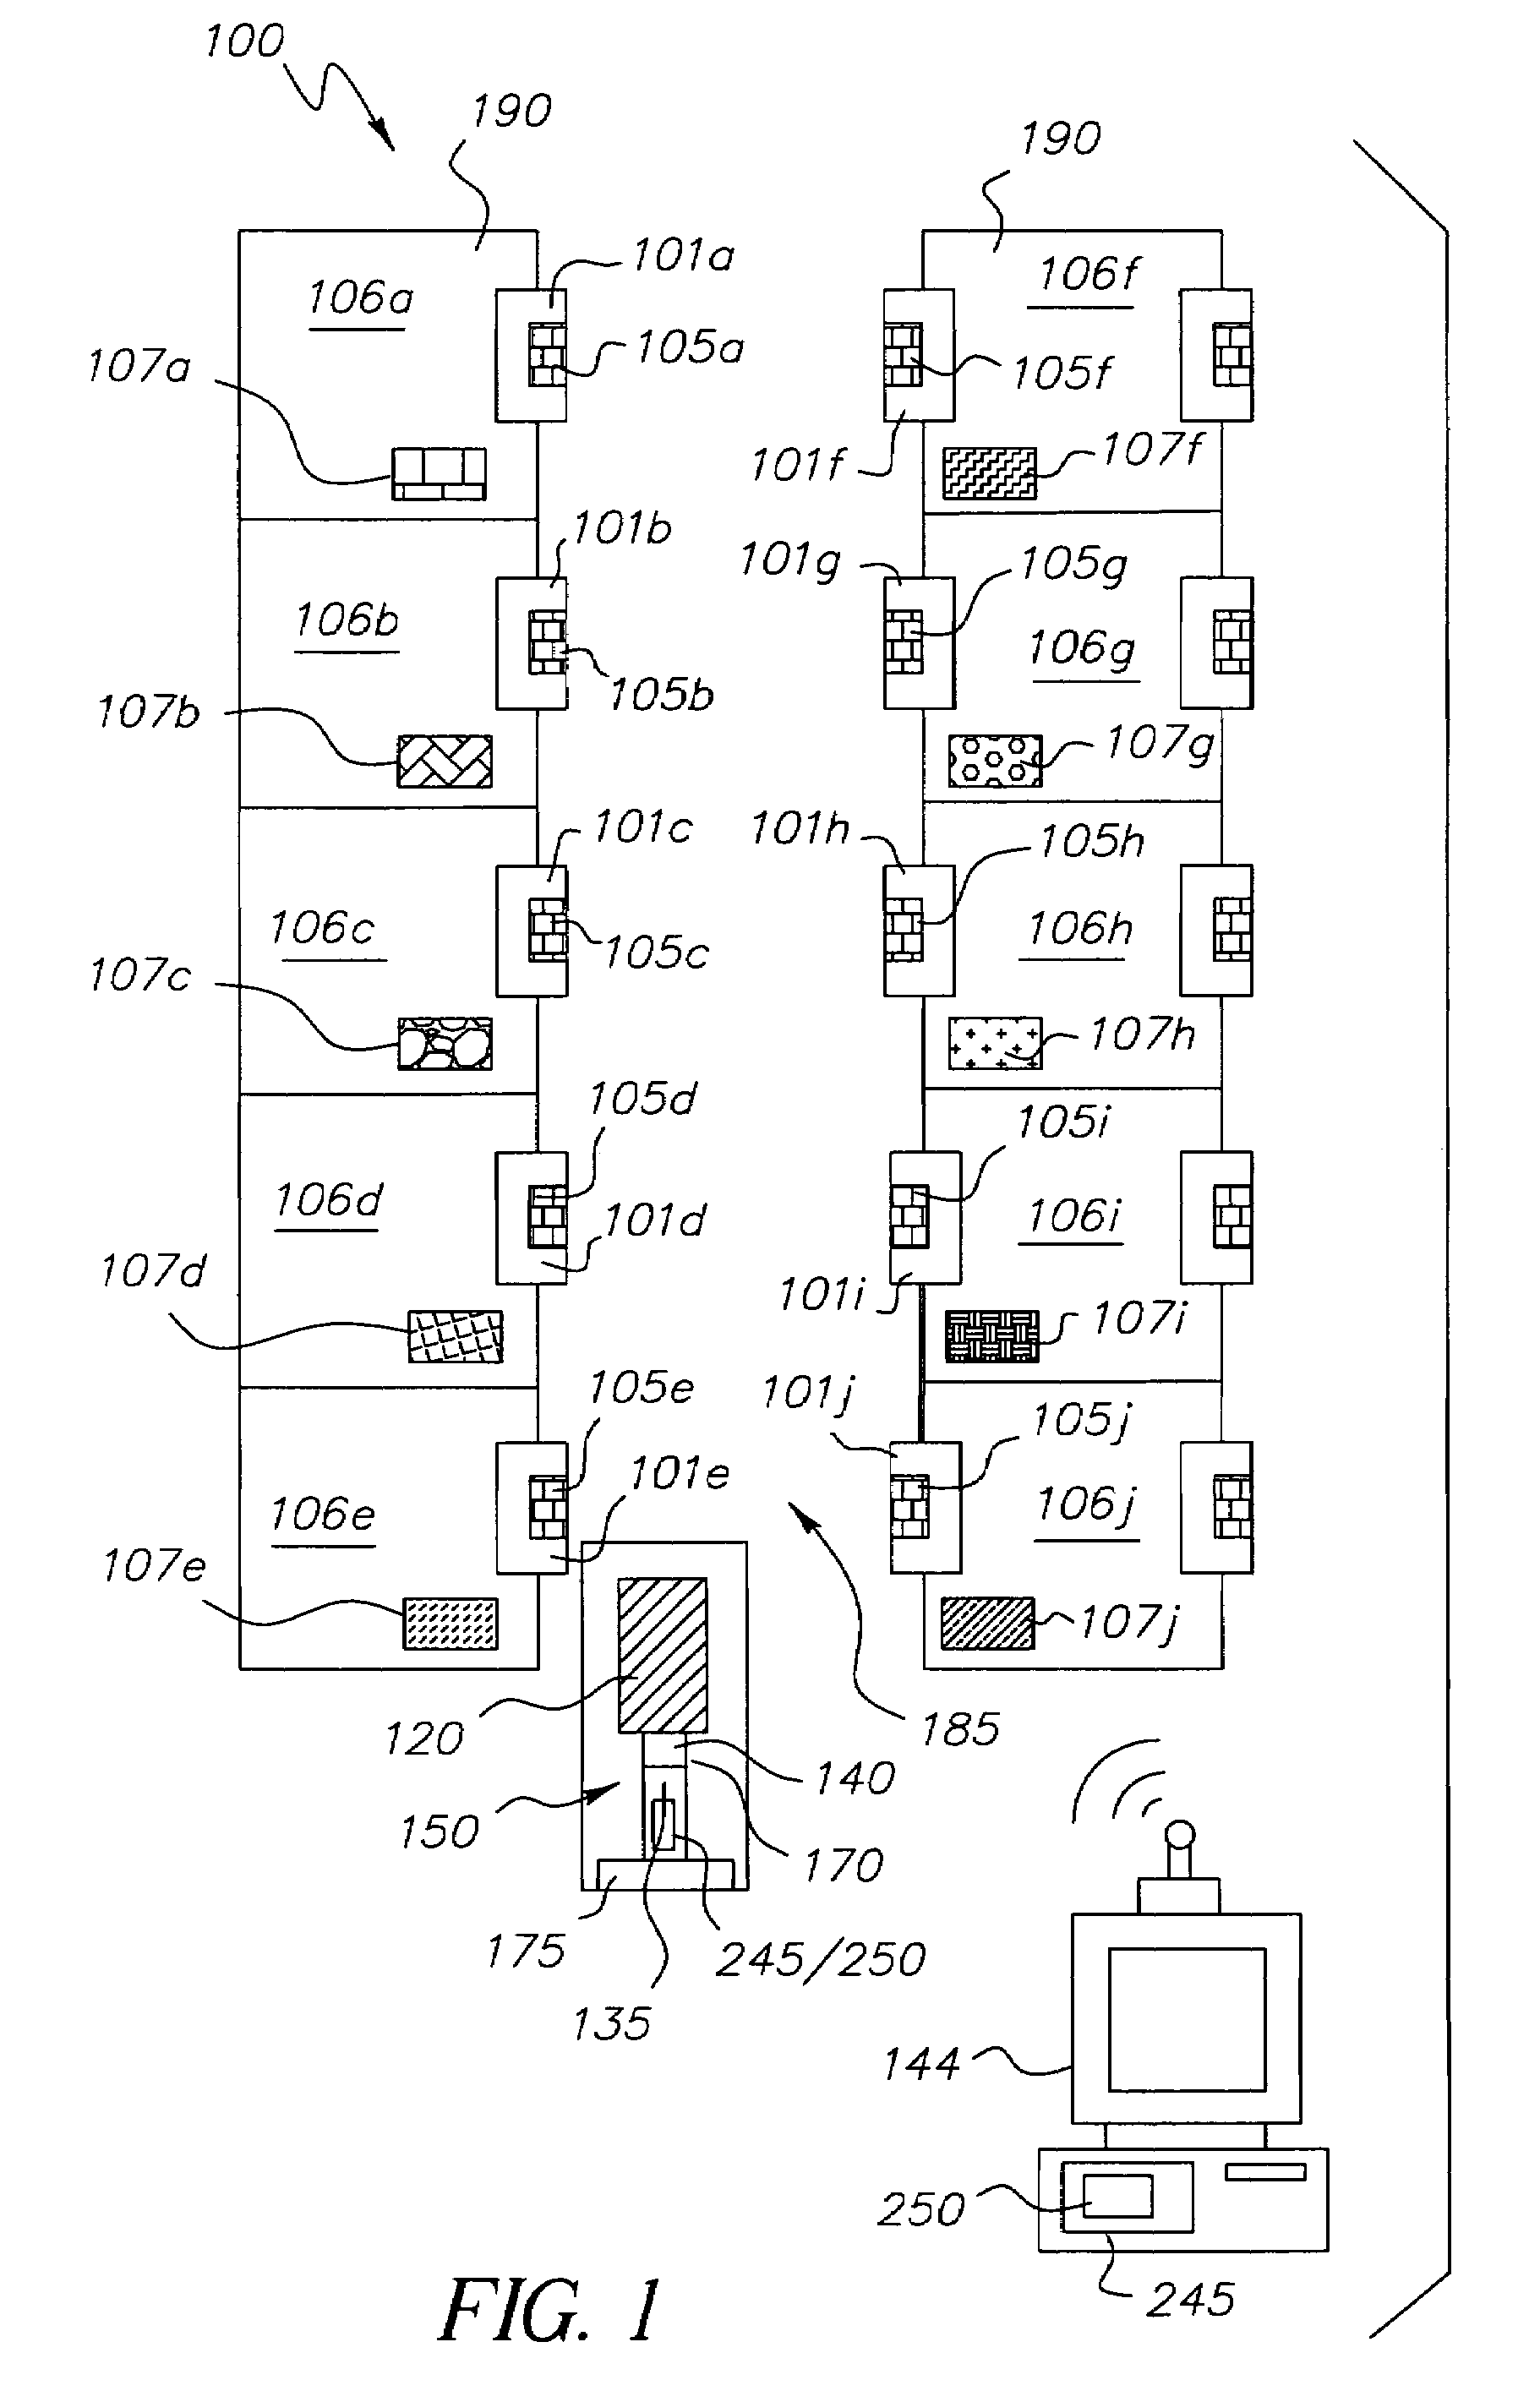 Item information system and method